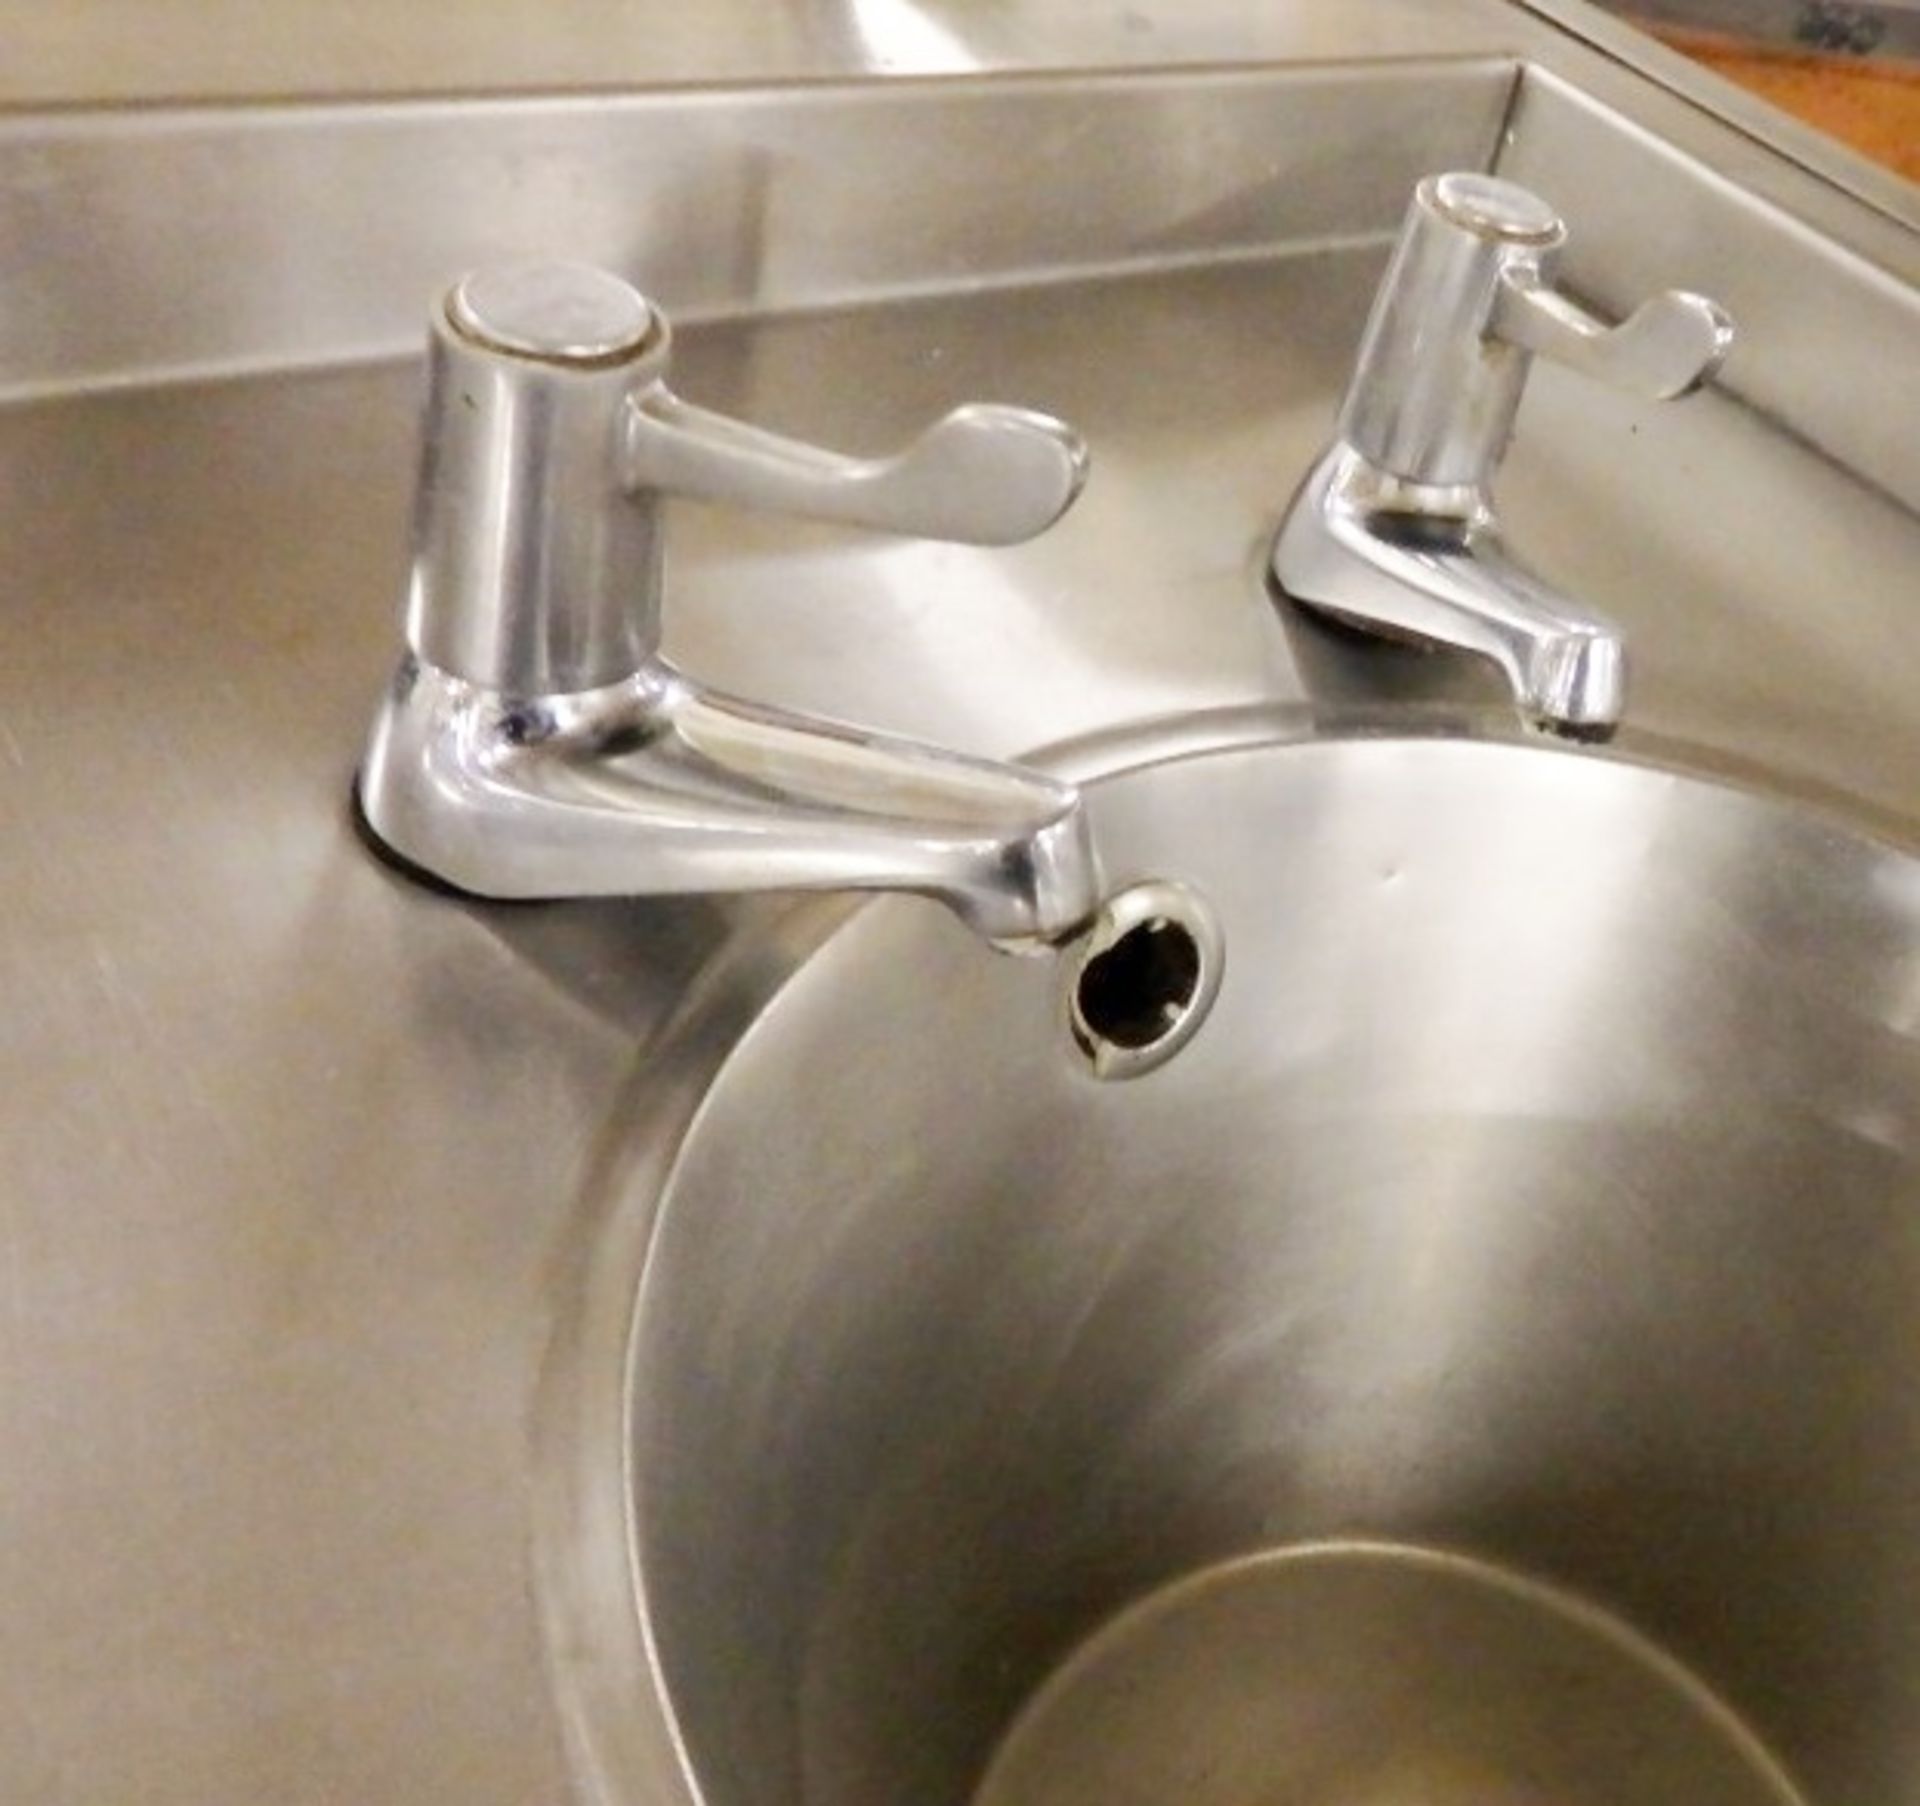 1 x Large Triple Bowl Stainless Steel Sink Unit, With 3-Door Storage - Dimensions: W272 x D65 x - Image 7 of 26